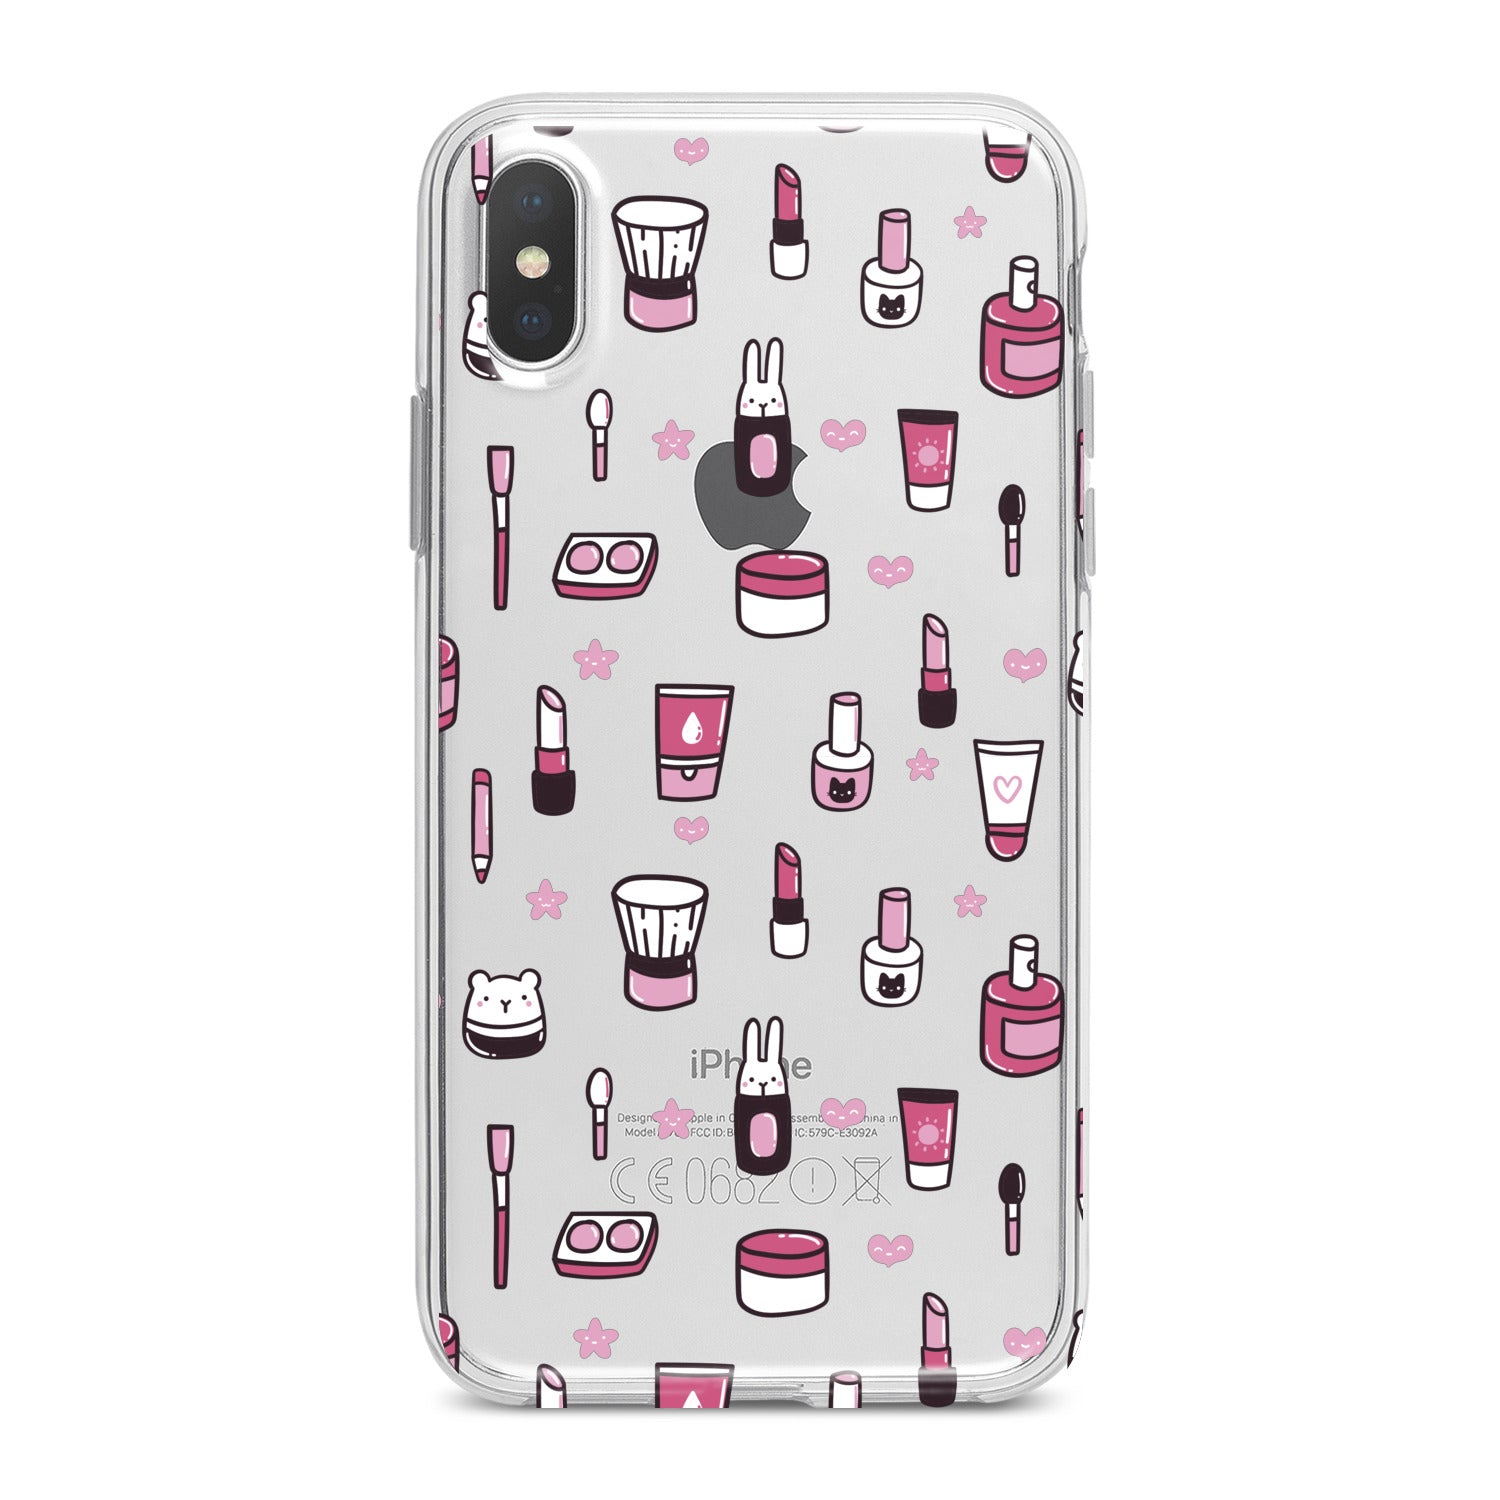 Lex Altern Cute Cosmetics Phone Case for your iPhone & Android phone.